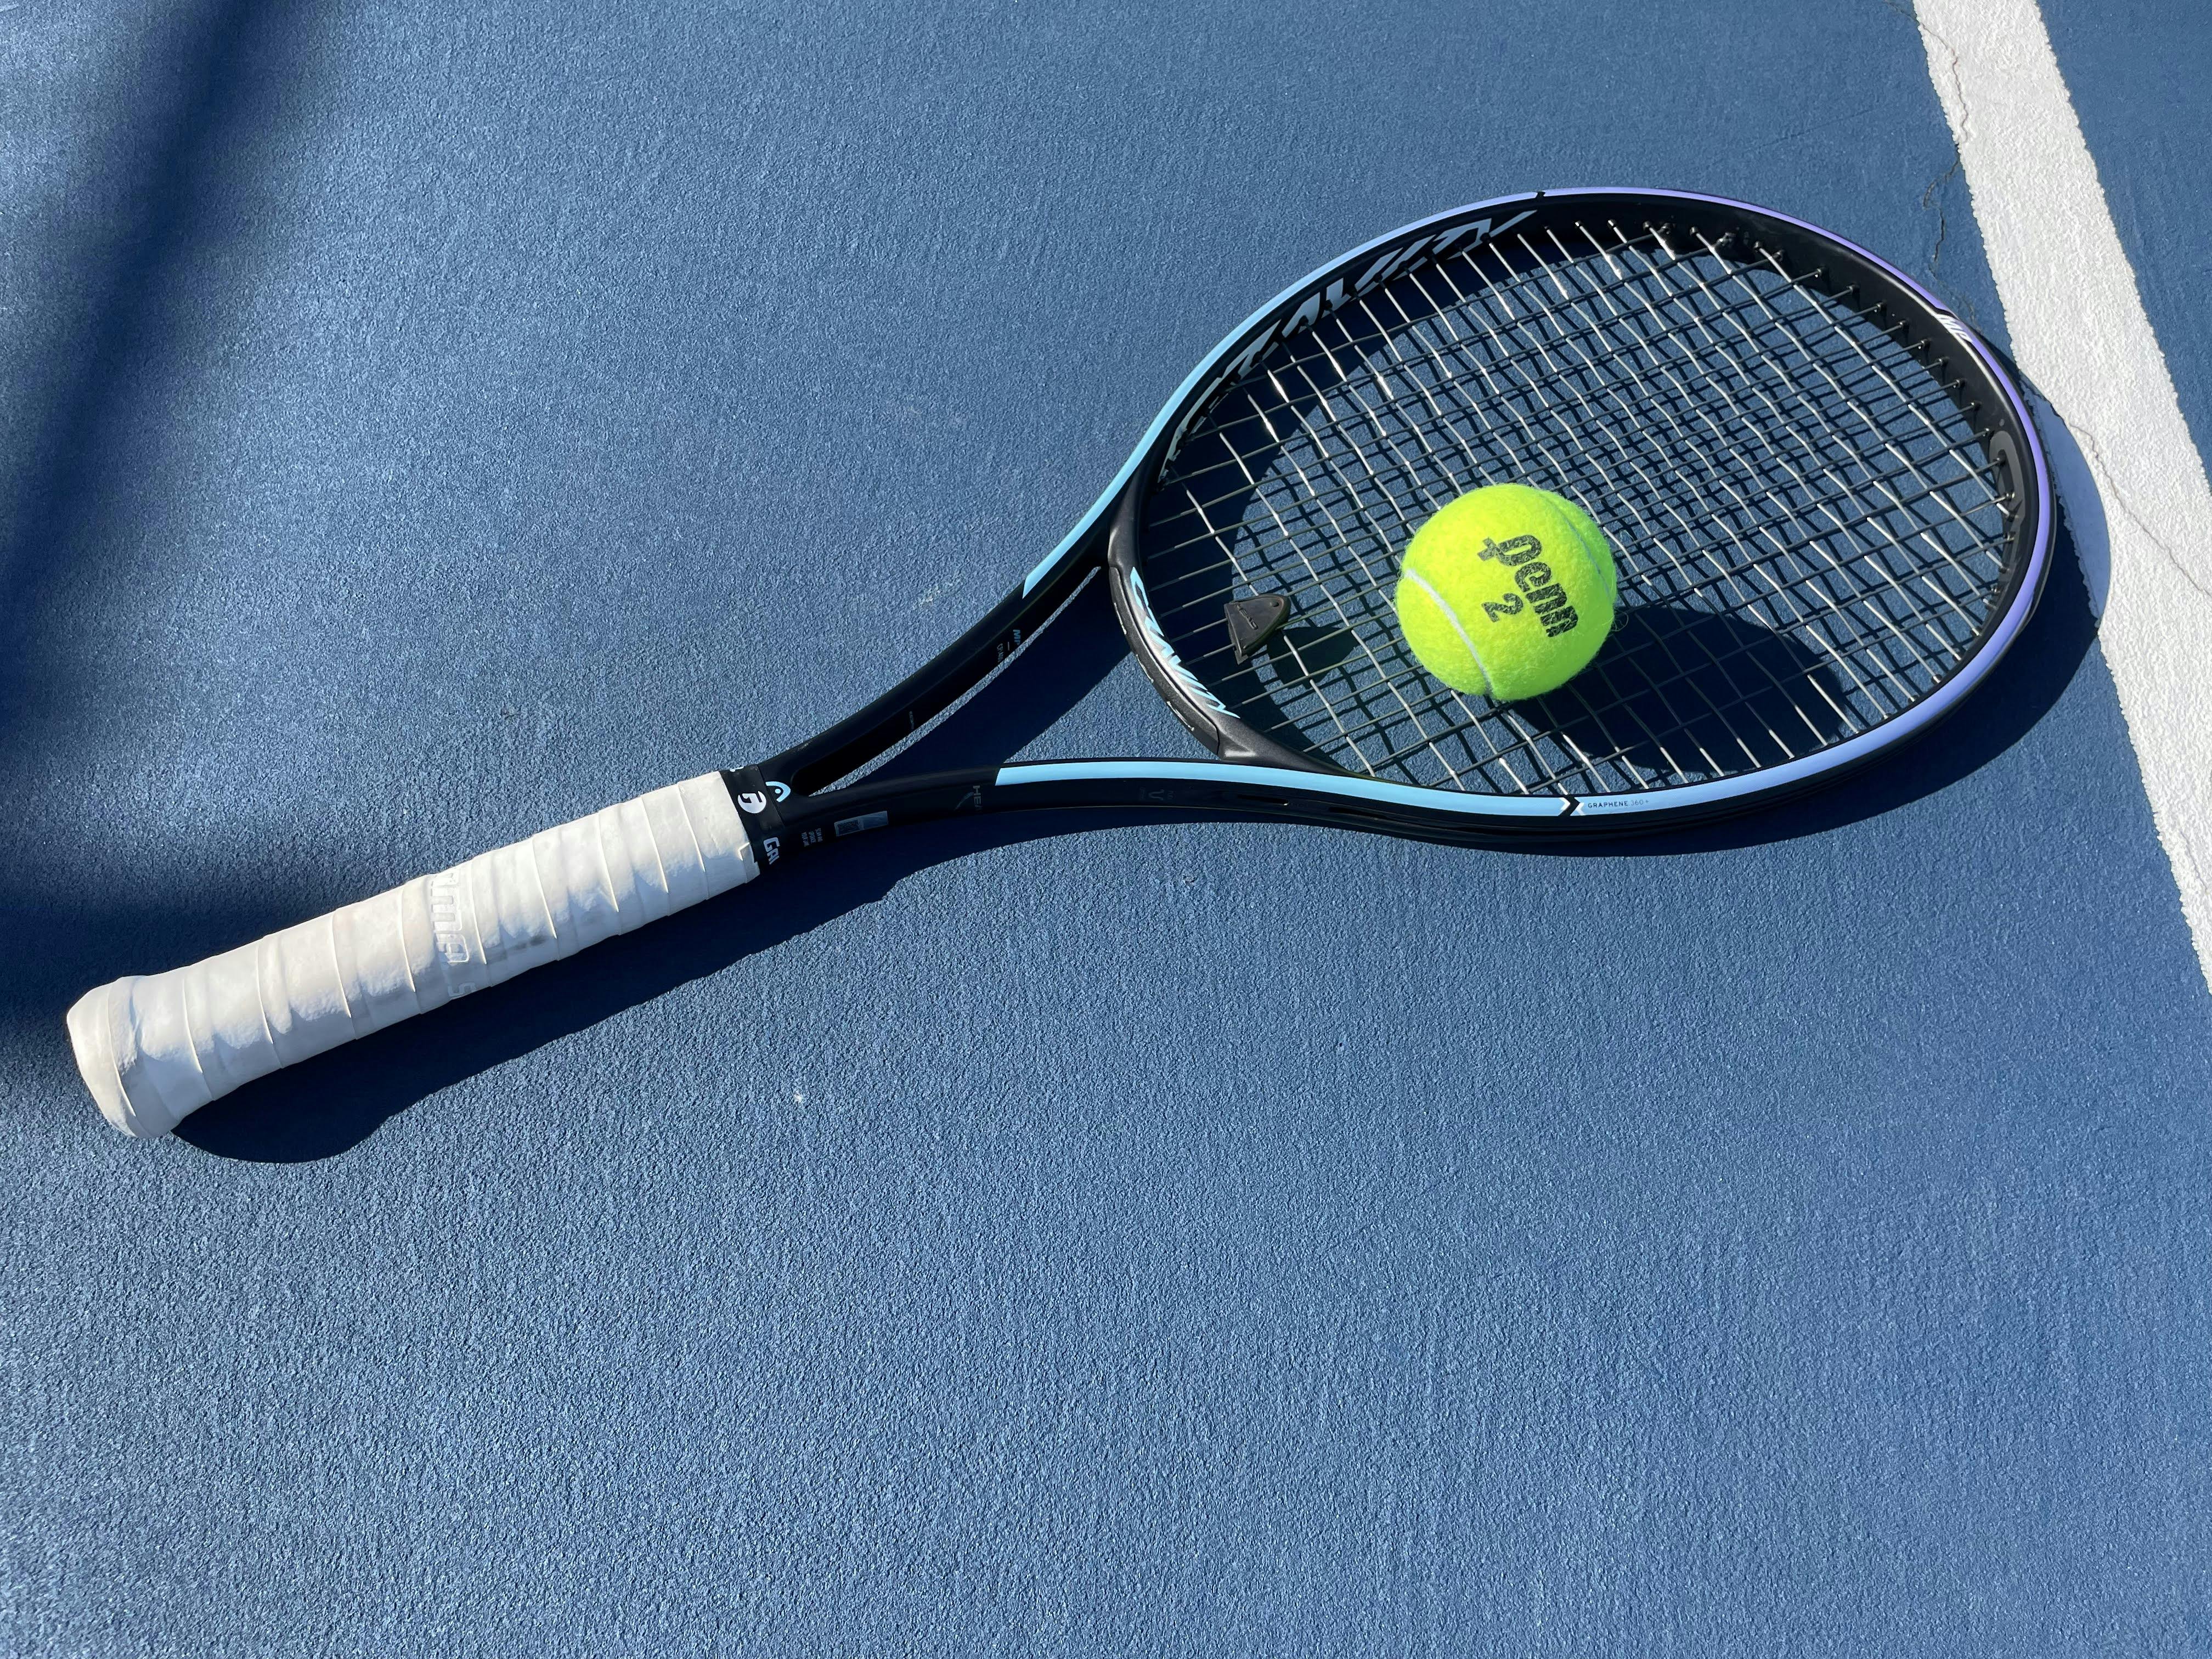 The Head Gravity MP Racquet in the color teal.